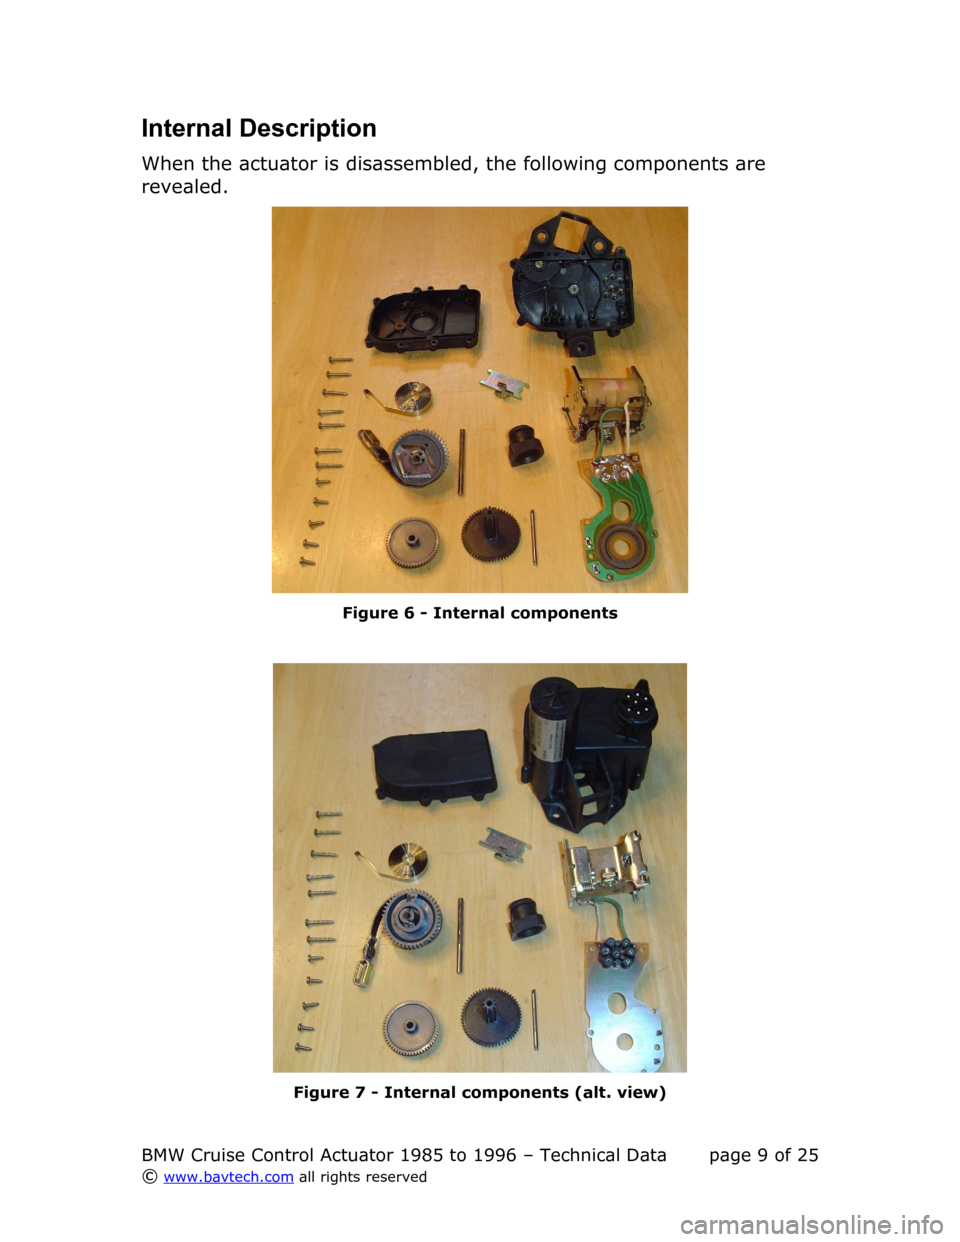 BMW 5 SERIES 1994 E34 Cruise Control Acutator Internal Description
When the actuator is disassembled, the following components are  
revealed.
Figure  6  - Internal components
Figure  7  - Internal components (alt. view)
BMW Cruise Control Actuat